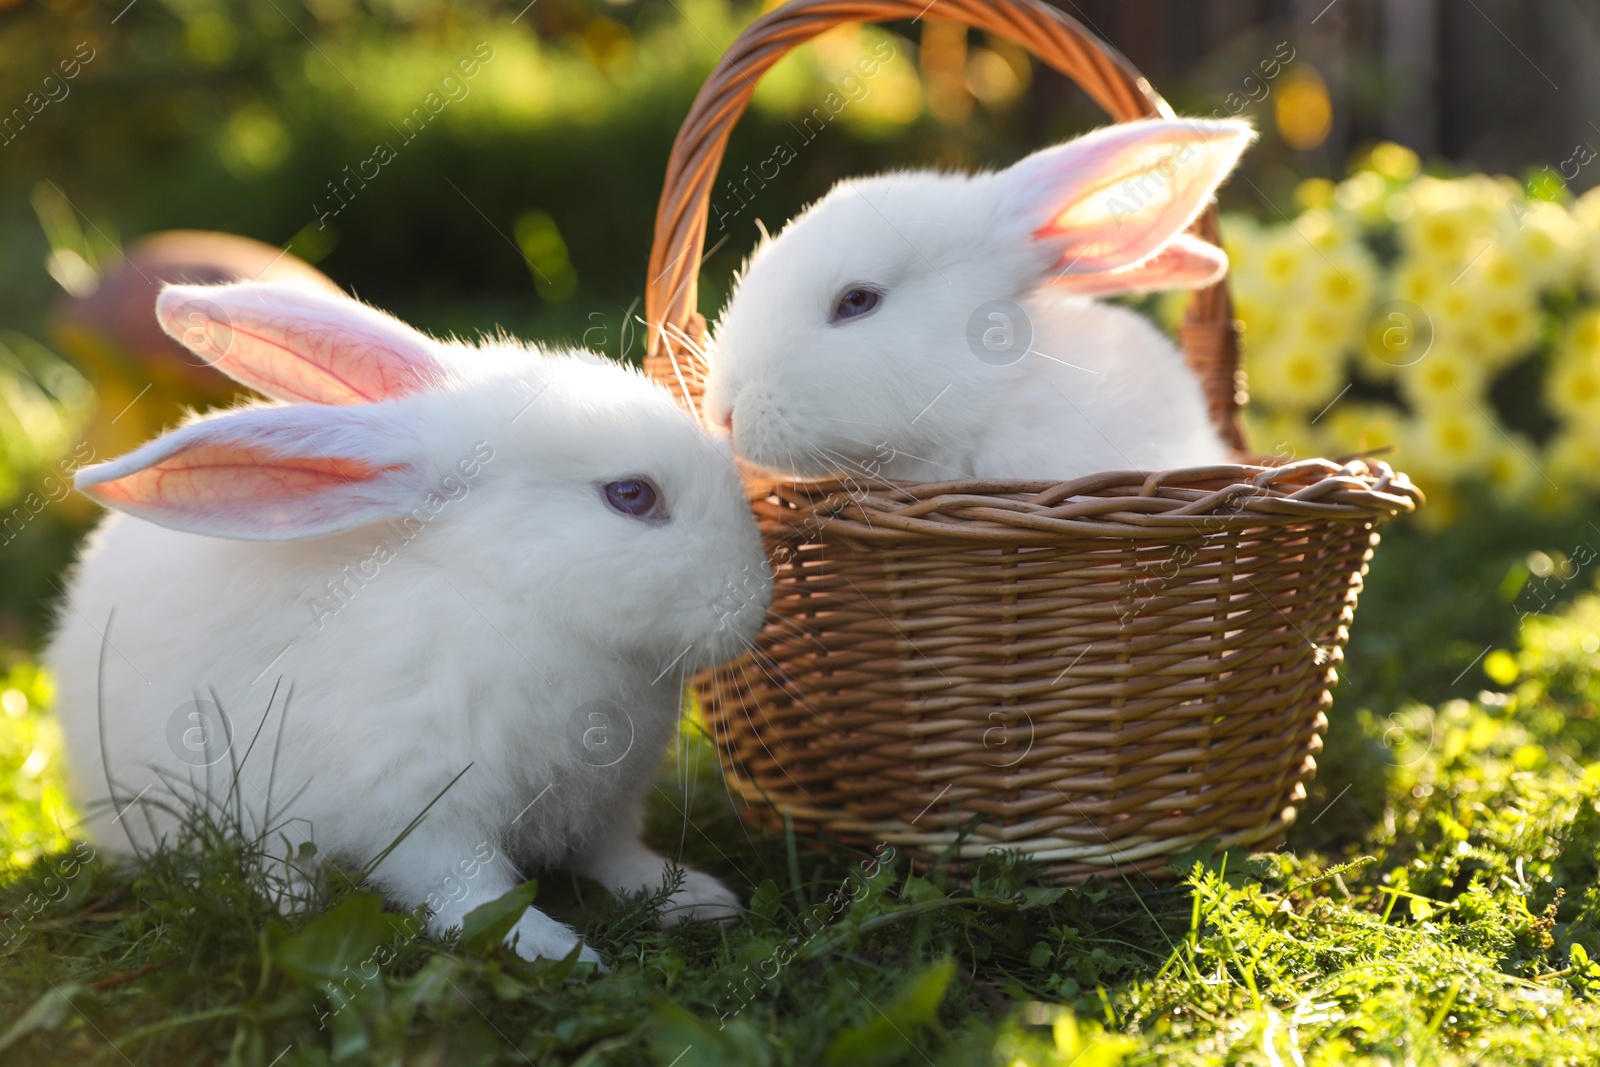 Photo of Cute white rabbits and wicker basket on green grass outdoors